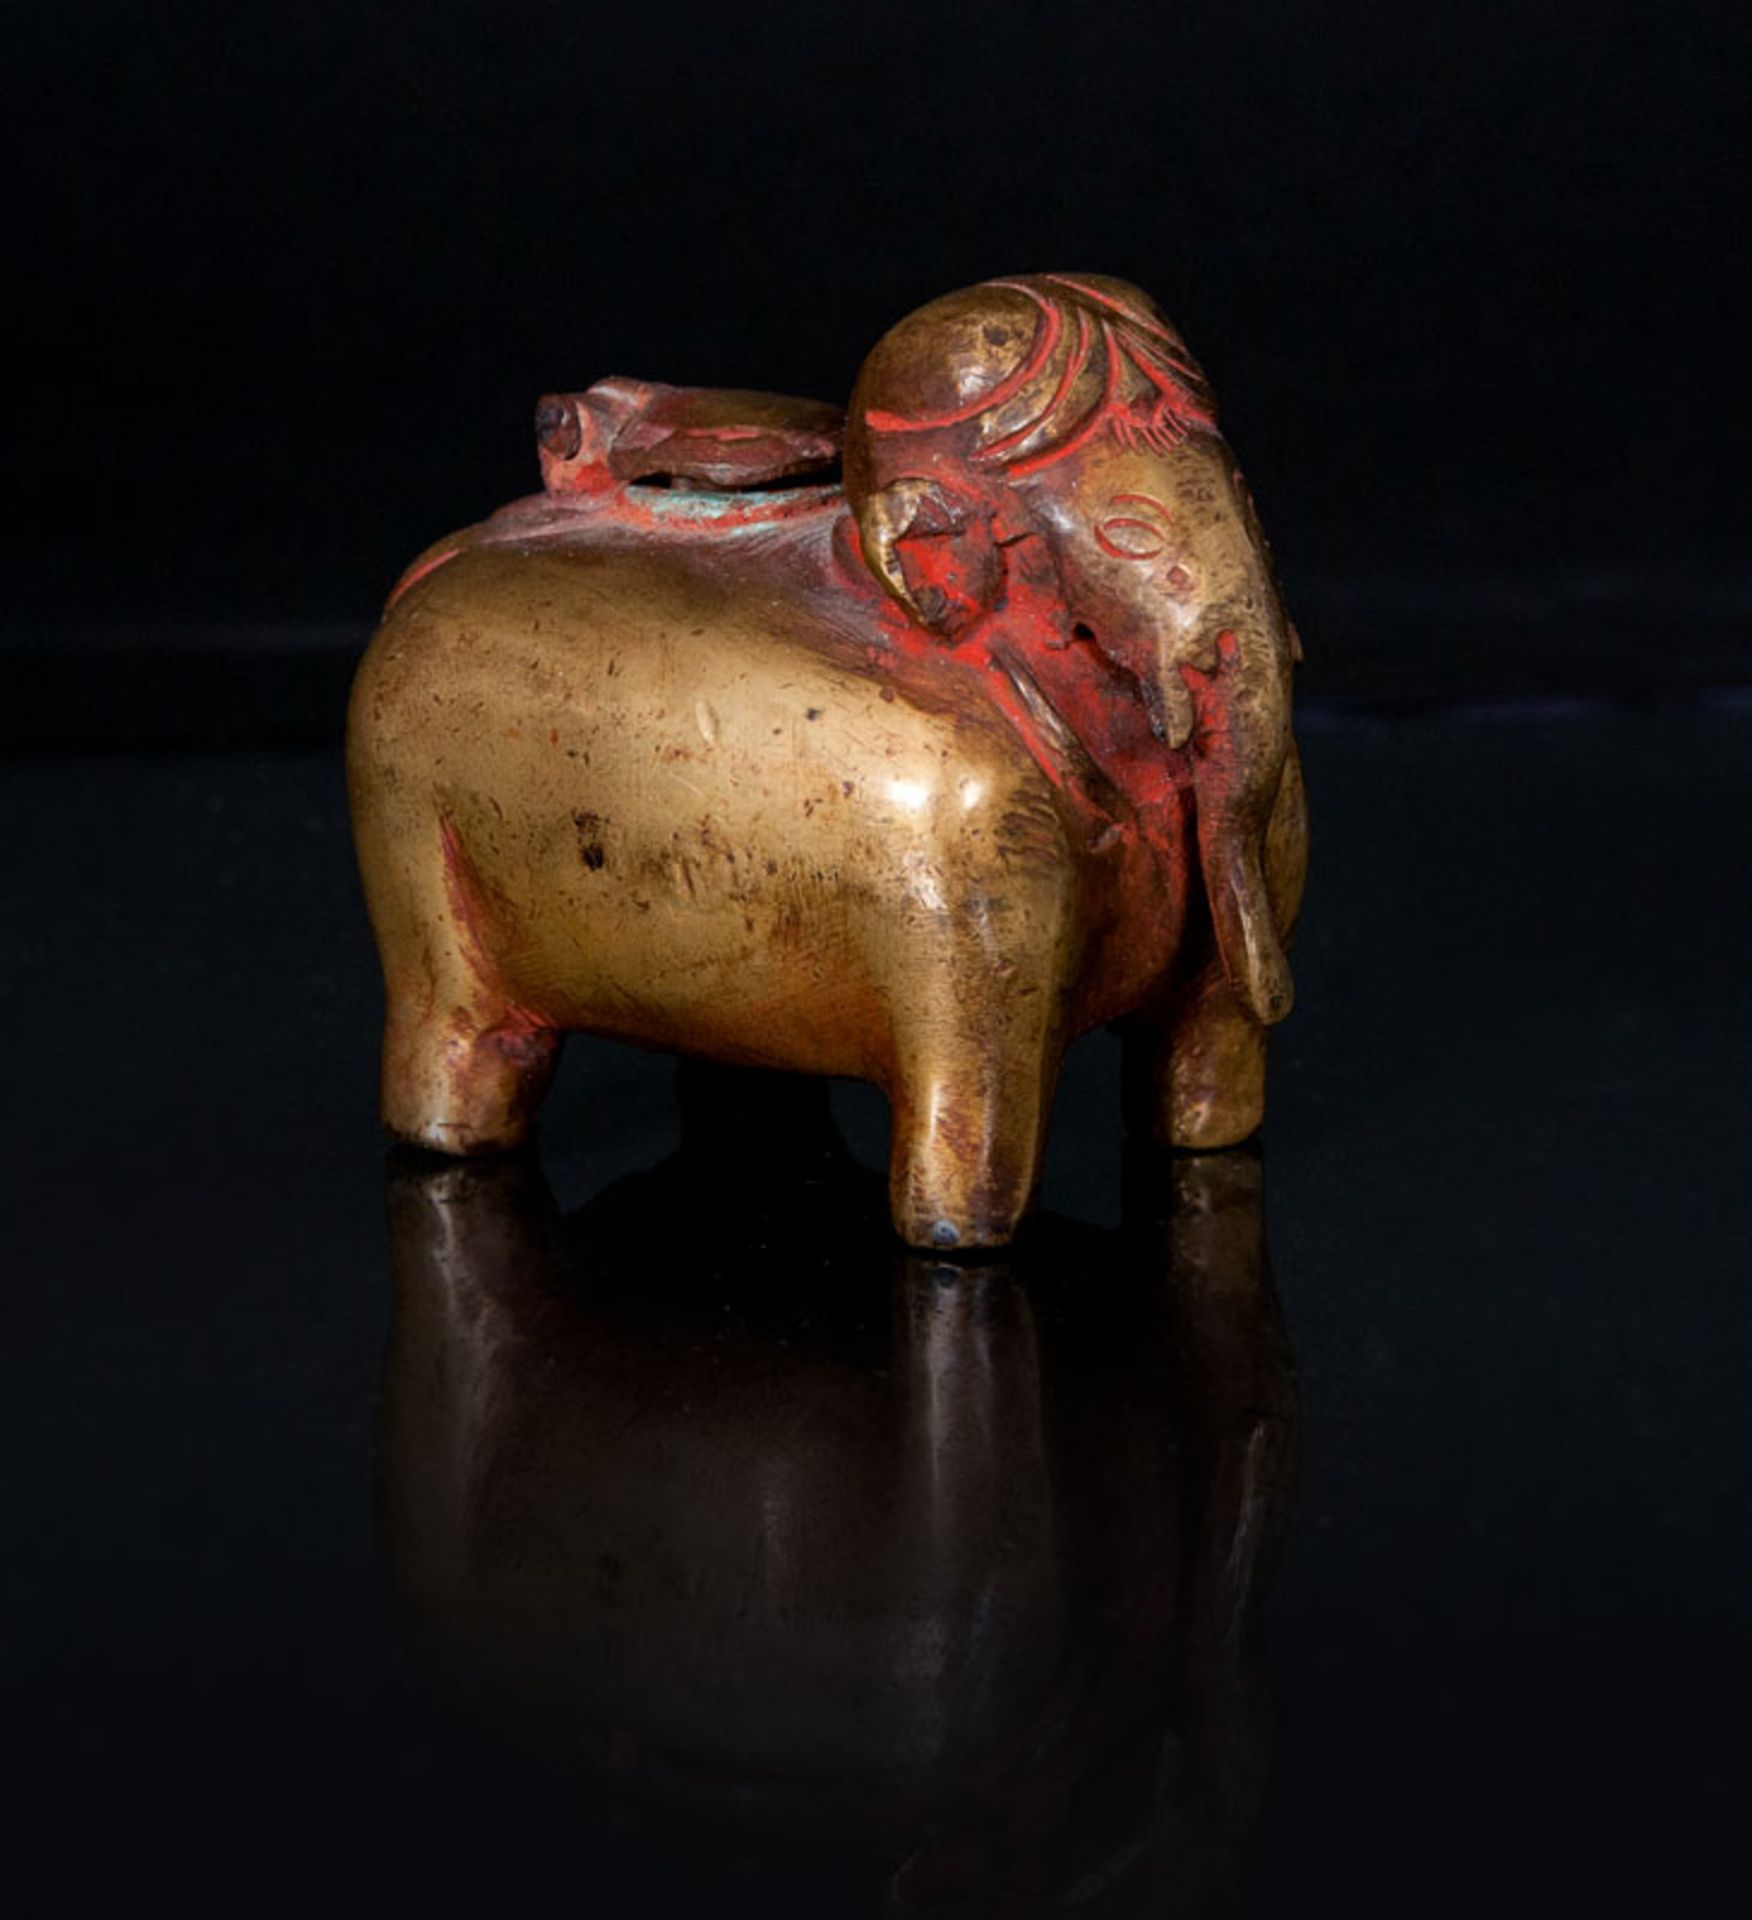 A small Mughal style bronze elephant India, 19th cent. Bronze, gilt and with traces of polychrome